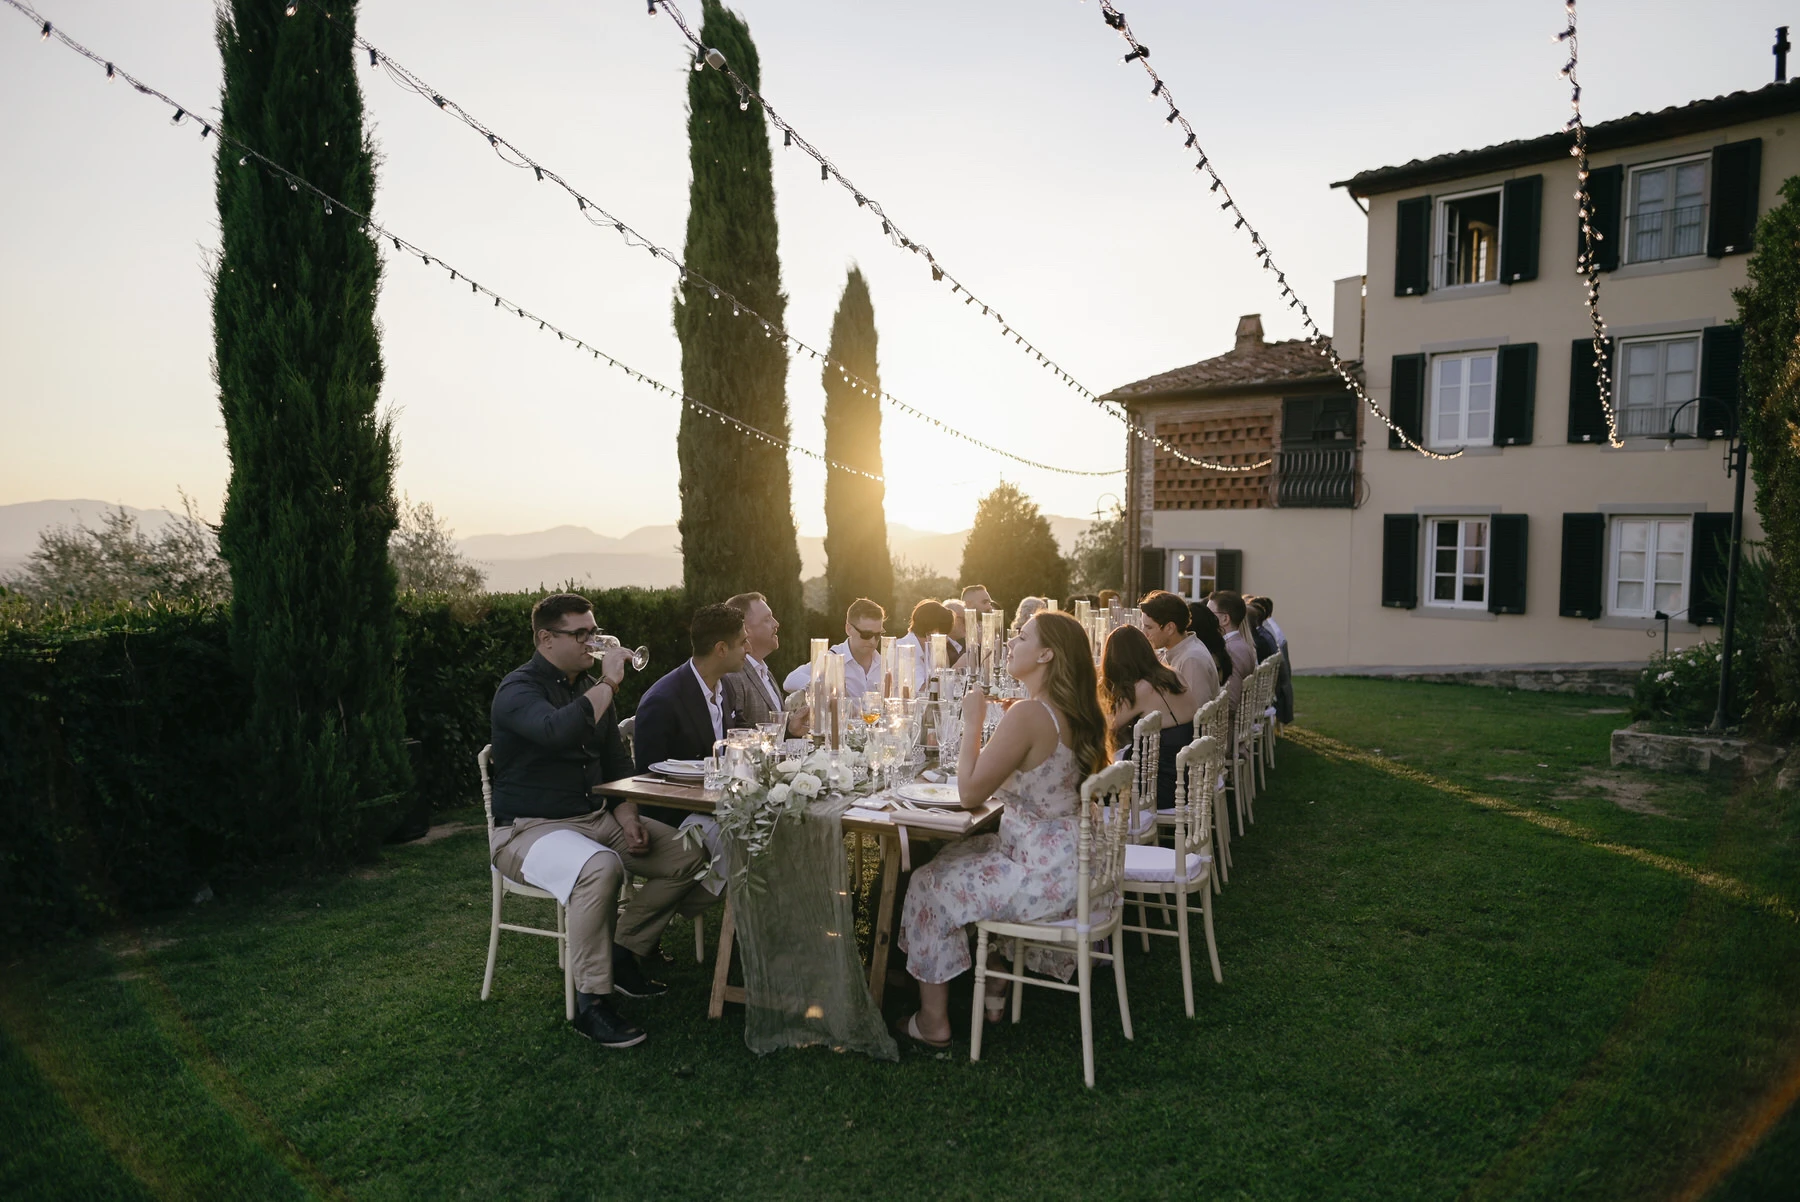 Tuscan Tranquility: A Wedding Tale Amidst the Hills